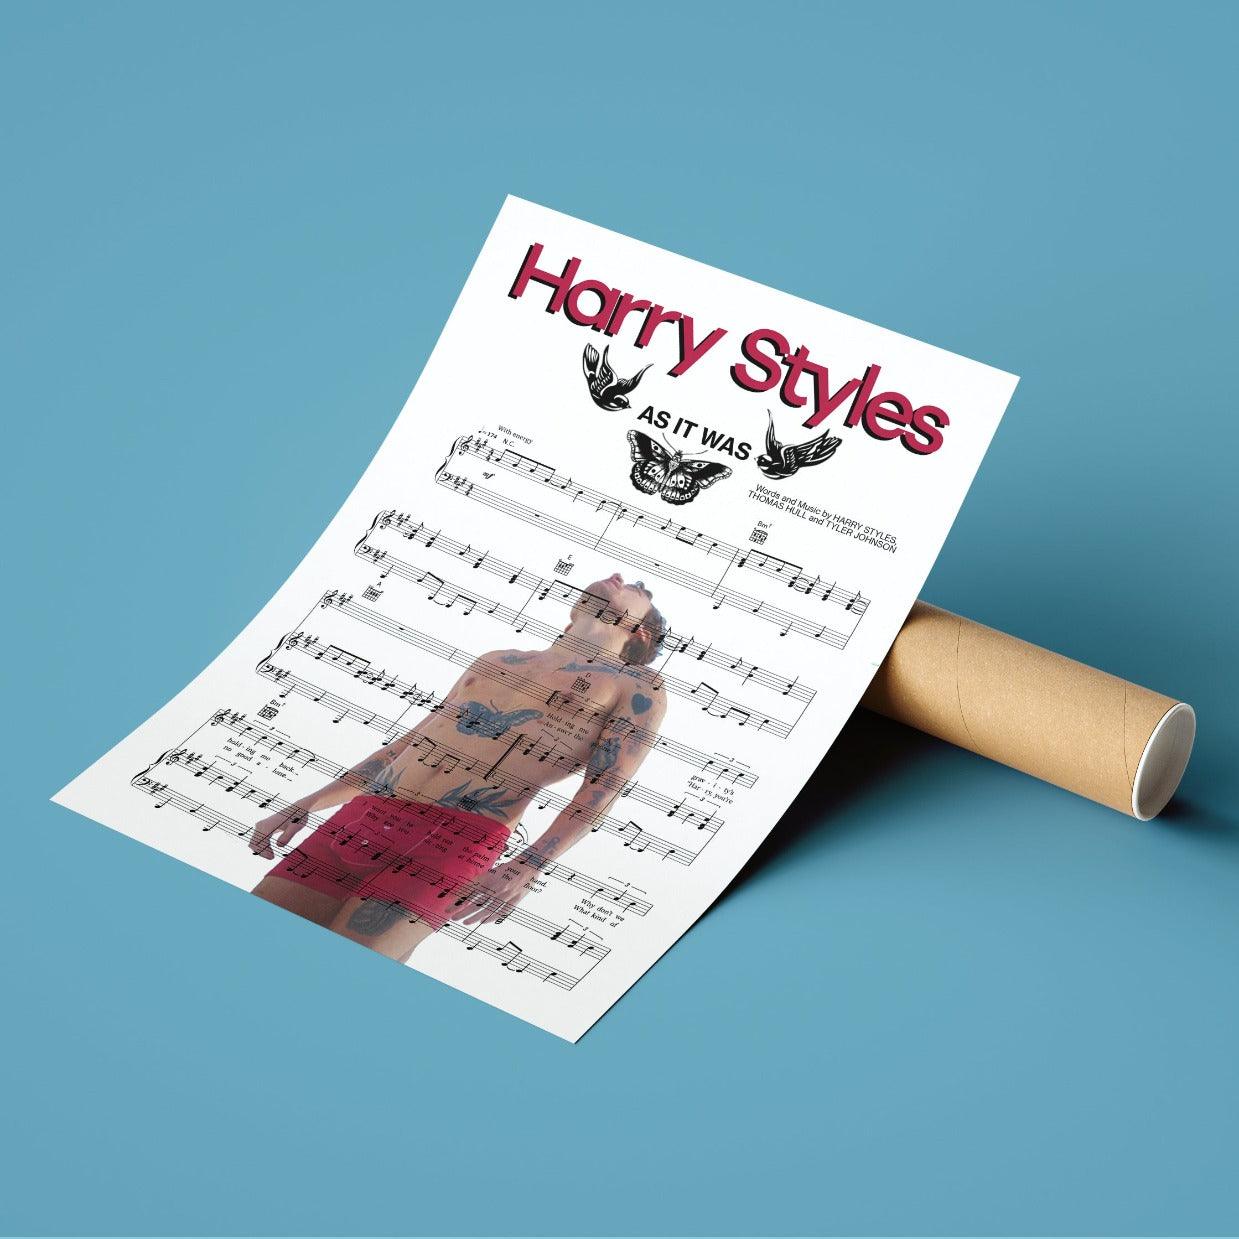 Harry Styles - As It Was Song Print | Song Music Sheet Notes Print Everyone has a favorite song especially Harry Styles - As It Was Print, and now you can show the score as printed staff. The personal favorite song sheet print shows the song chosen as the score.